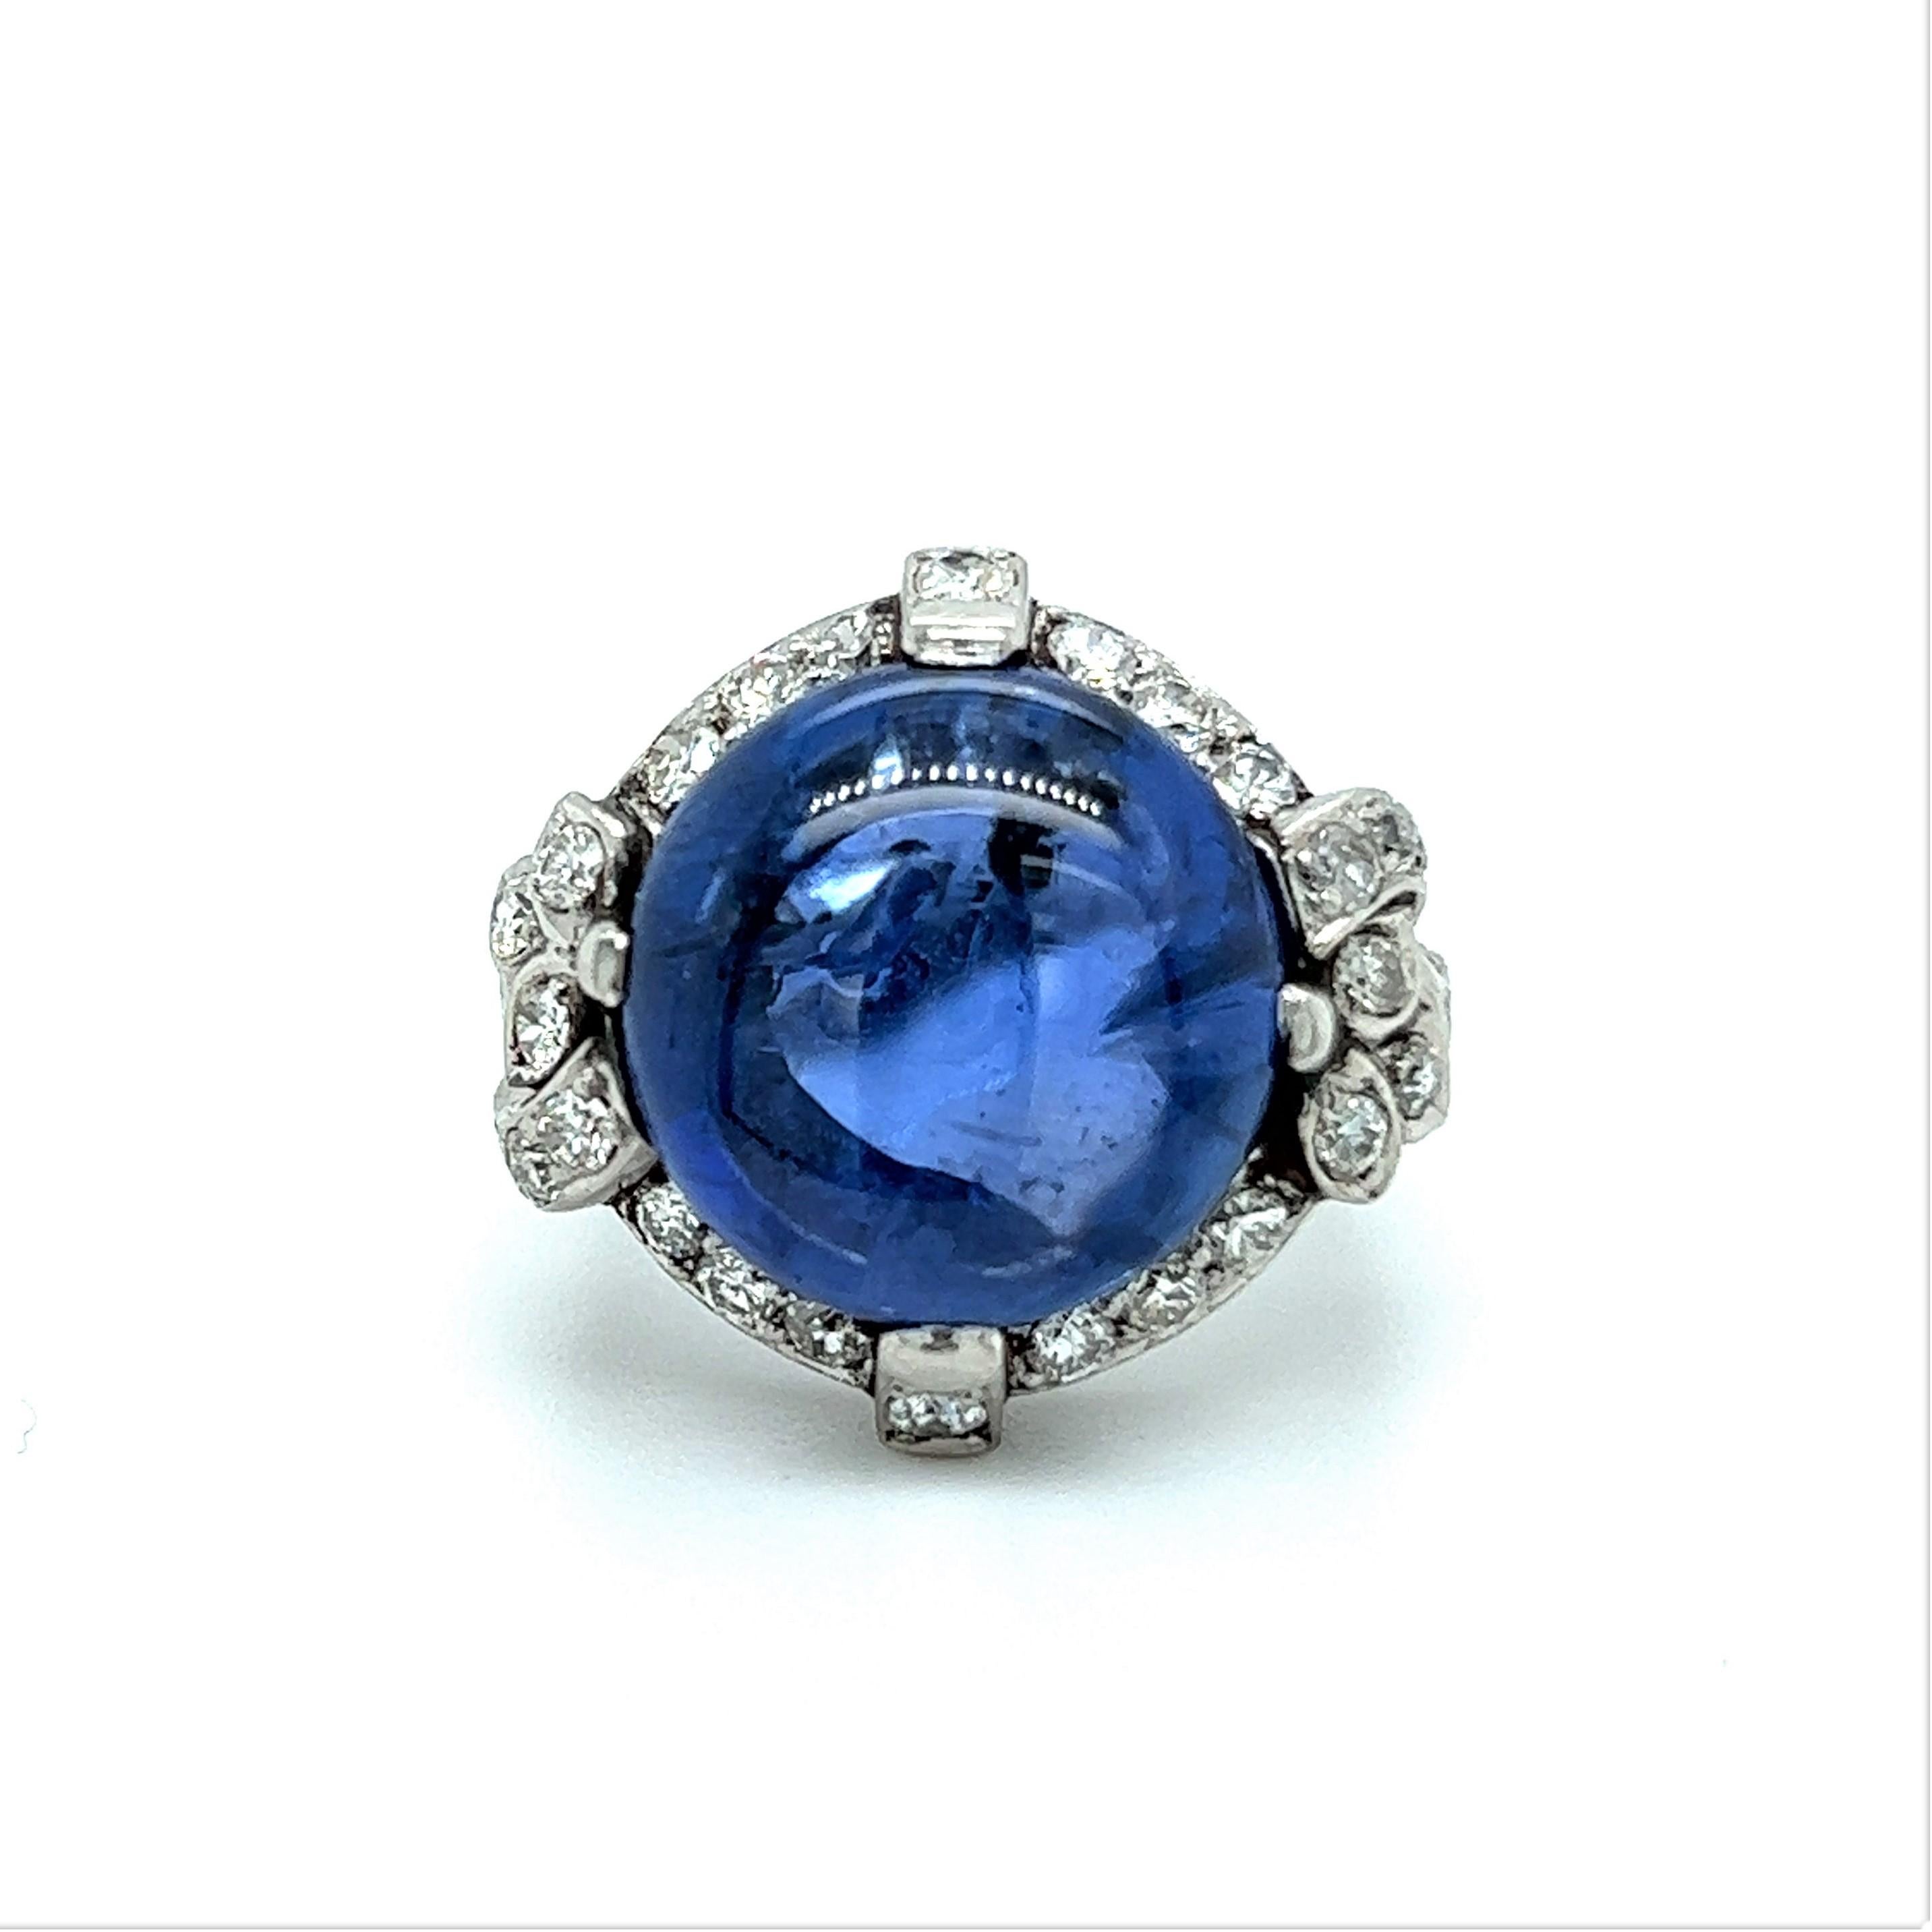 This outstanding antique ring is the embodiment of early 20th century glamour and sophistication. 
Center of the composition is a gorgeous, untreated, cabochon sapphire of approximate 15.20 carats. It is framed by refined platinum setting and 26